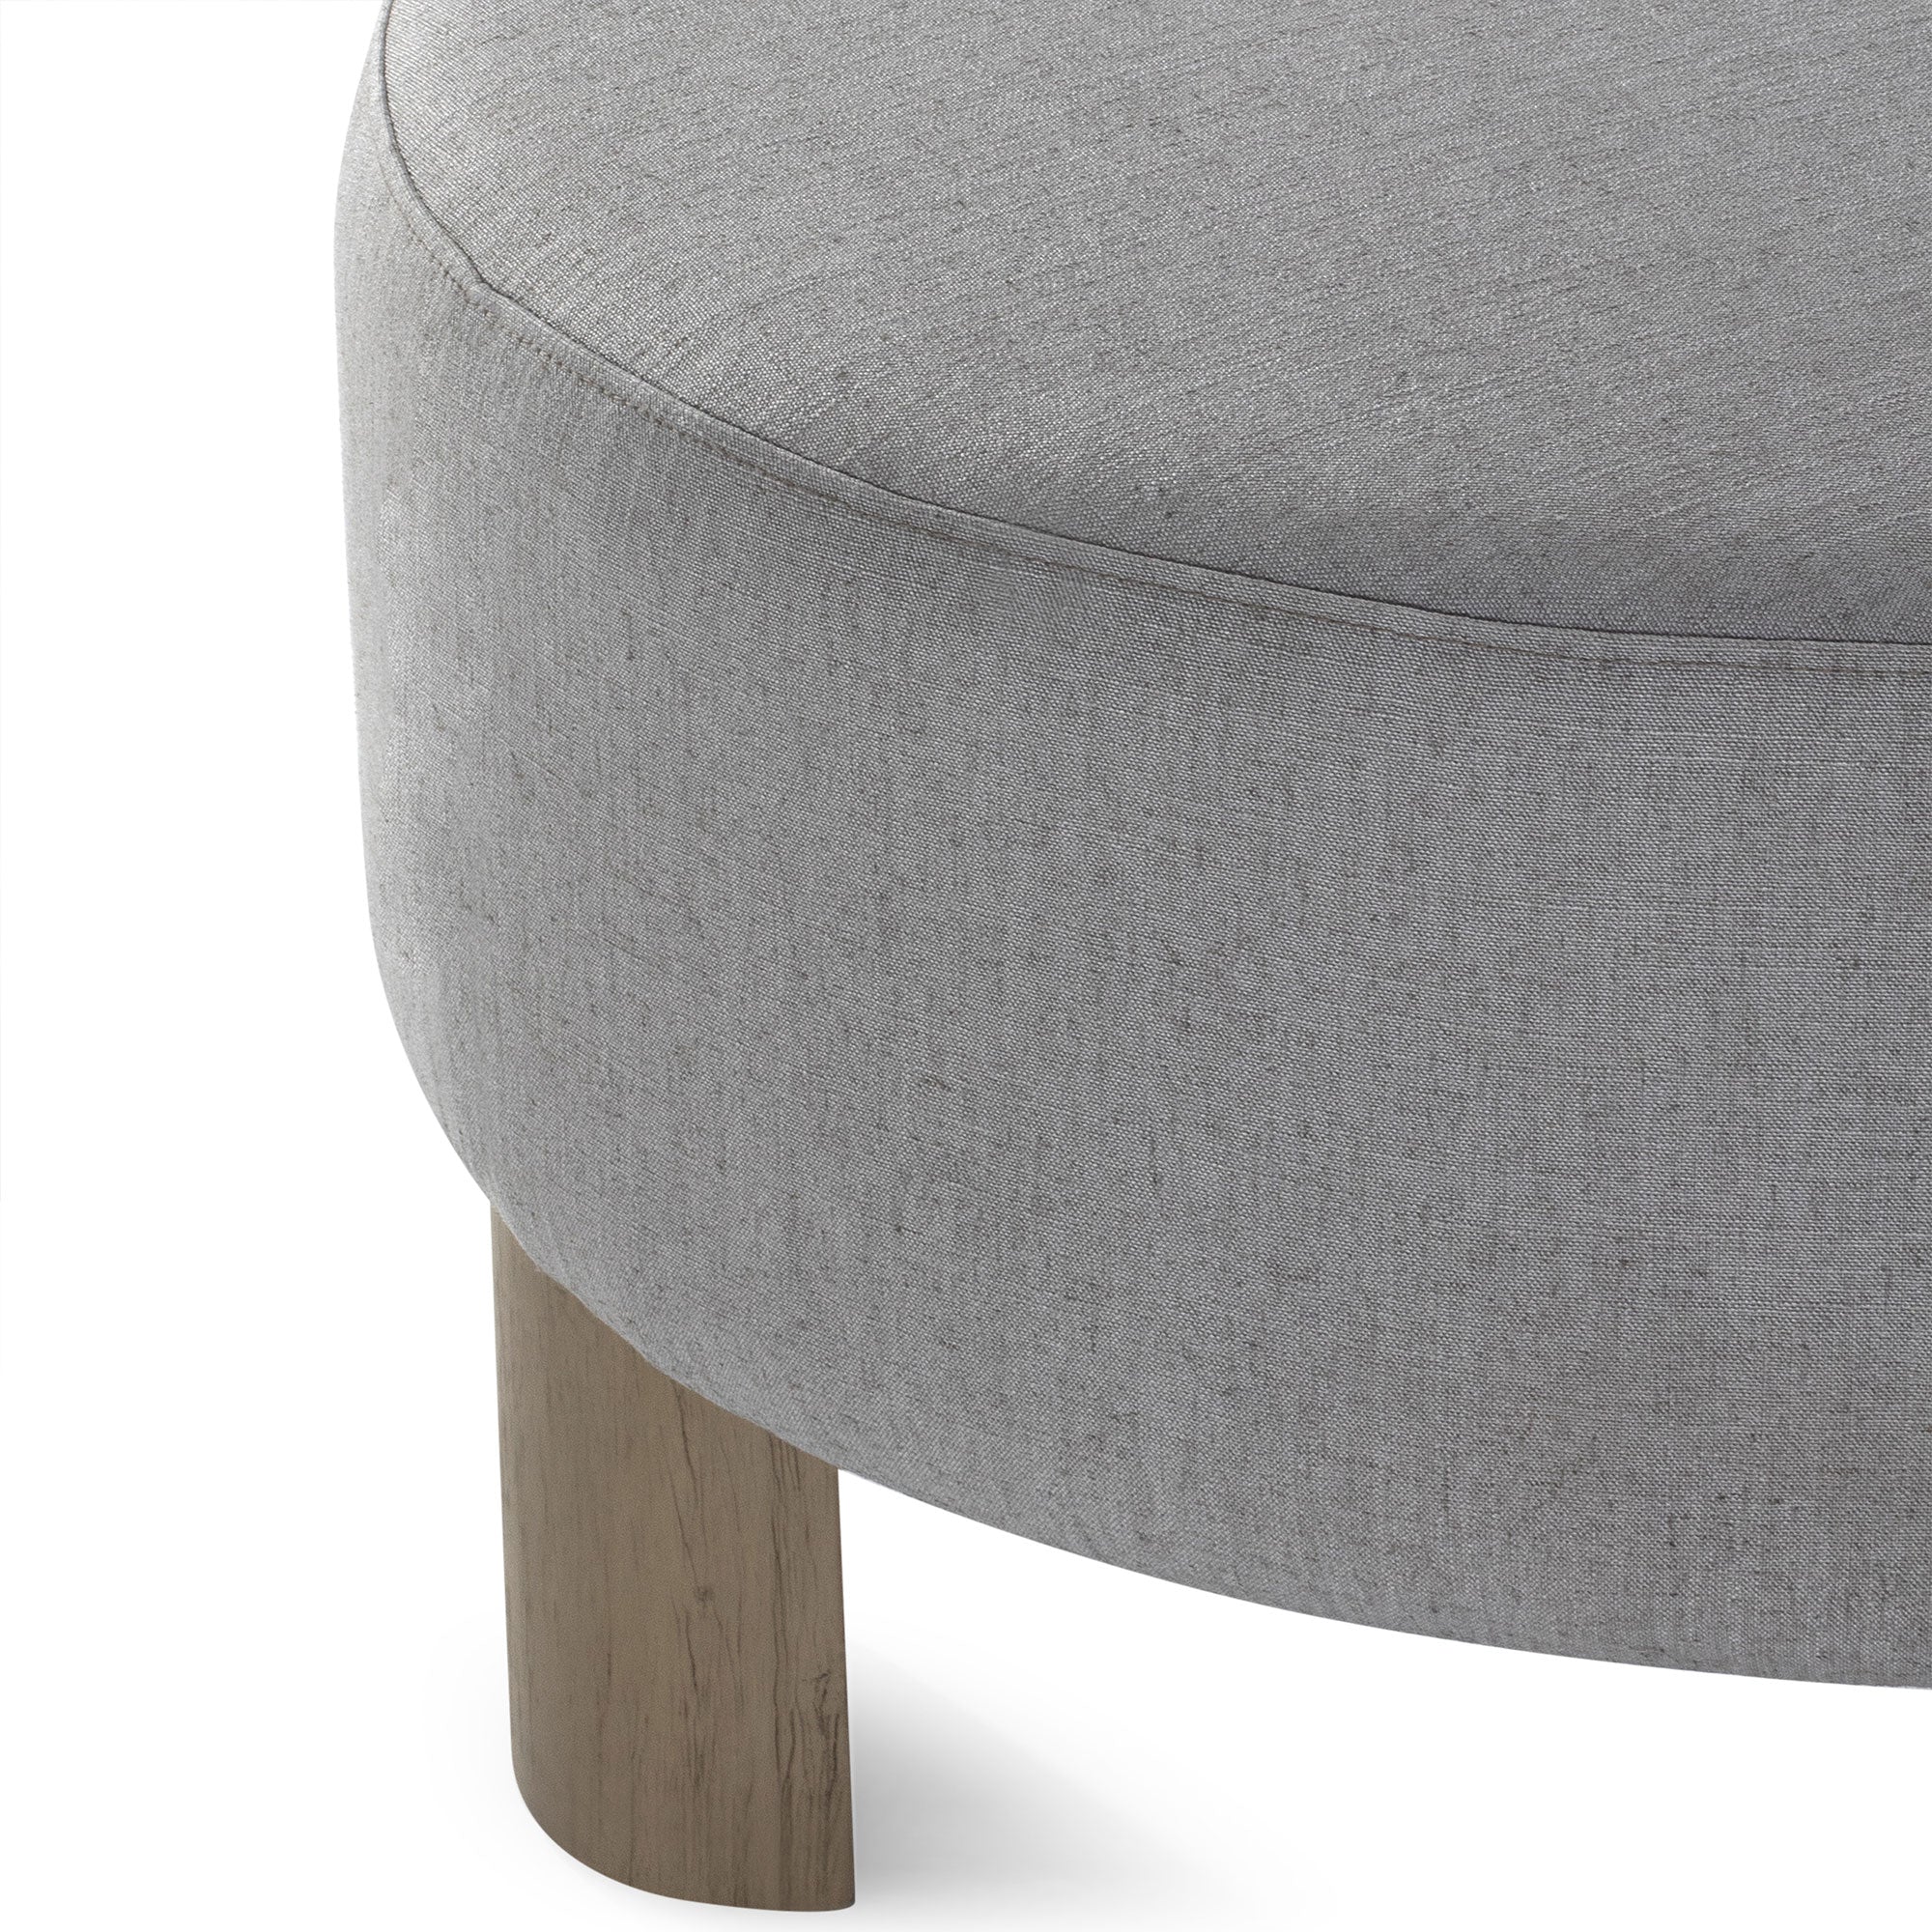 Celia Contemporary Upholstered Ottoman with Refined Grey Wood Finish in Ottomans & Benches by Maven Lane